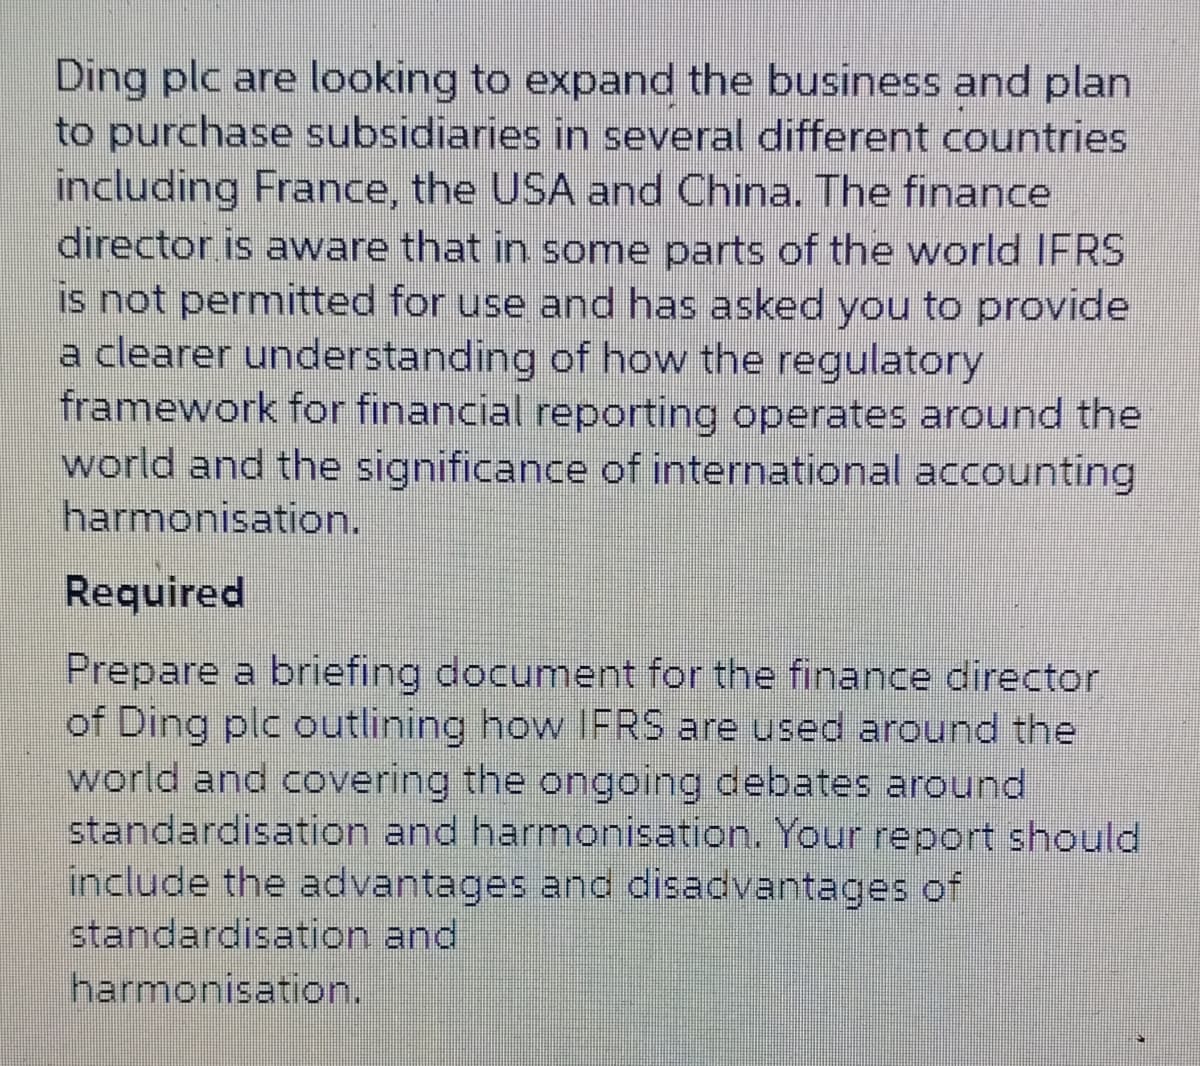 Ding plc are looking to expand the business and plan
to purchase subsidiaries in several different countries
including France, the USA and China. The finance
director is aware that in some parts of the world IFRS
is not permitted for use and has asked you to provide
a clearer understanding of how the regulatory
framework for financial reporting operates around the
world and the significance of international accounting
harmonisation.
Required
Prepare a briefing document for the finance director
of Ding plc outlining how IFRS are used around the
world and covering the ongoing debates around
standardisation and harmonisation. Your report should
include the advantages and disadvantages of
standardisation and
harmonisation.
